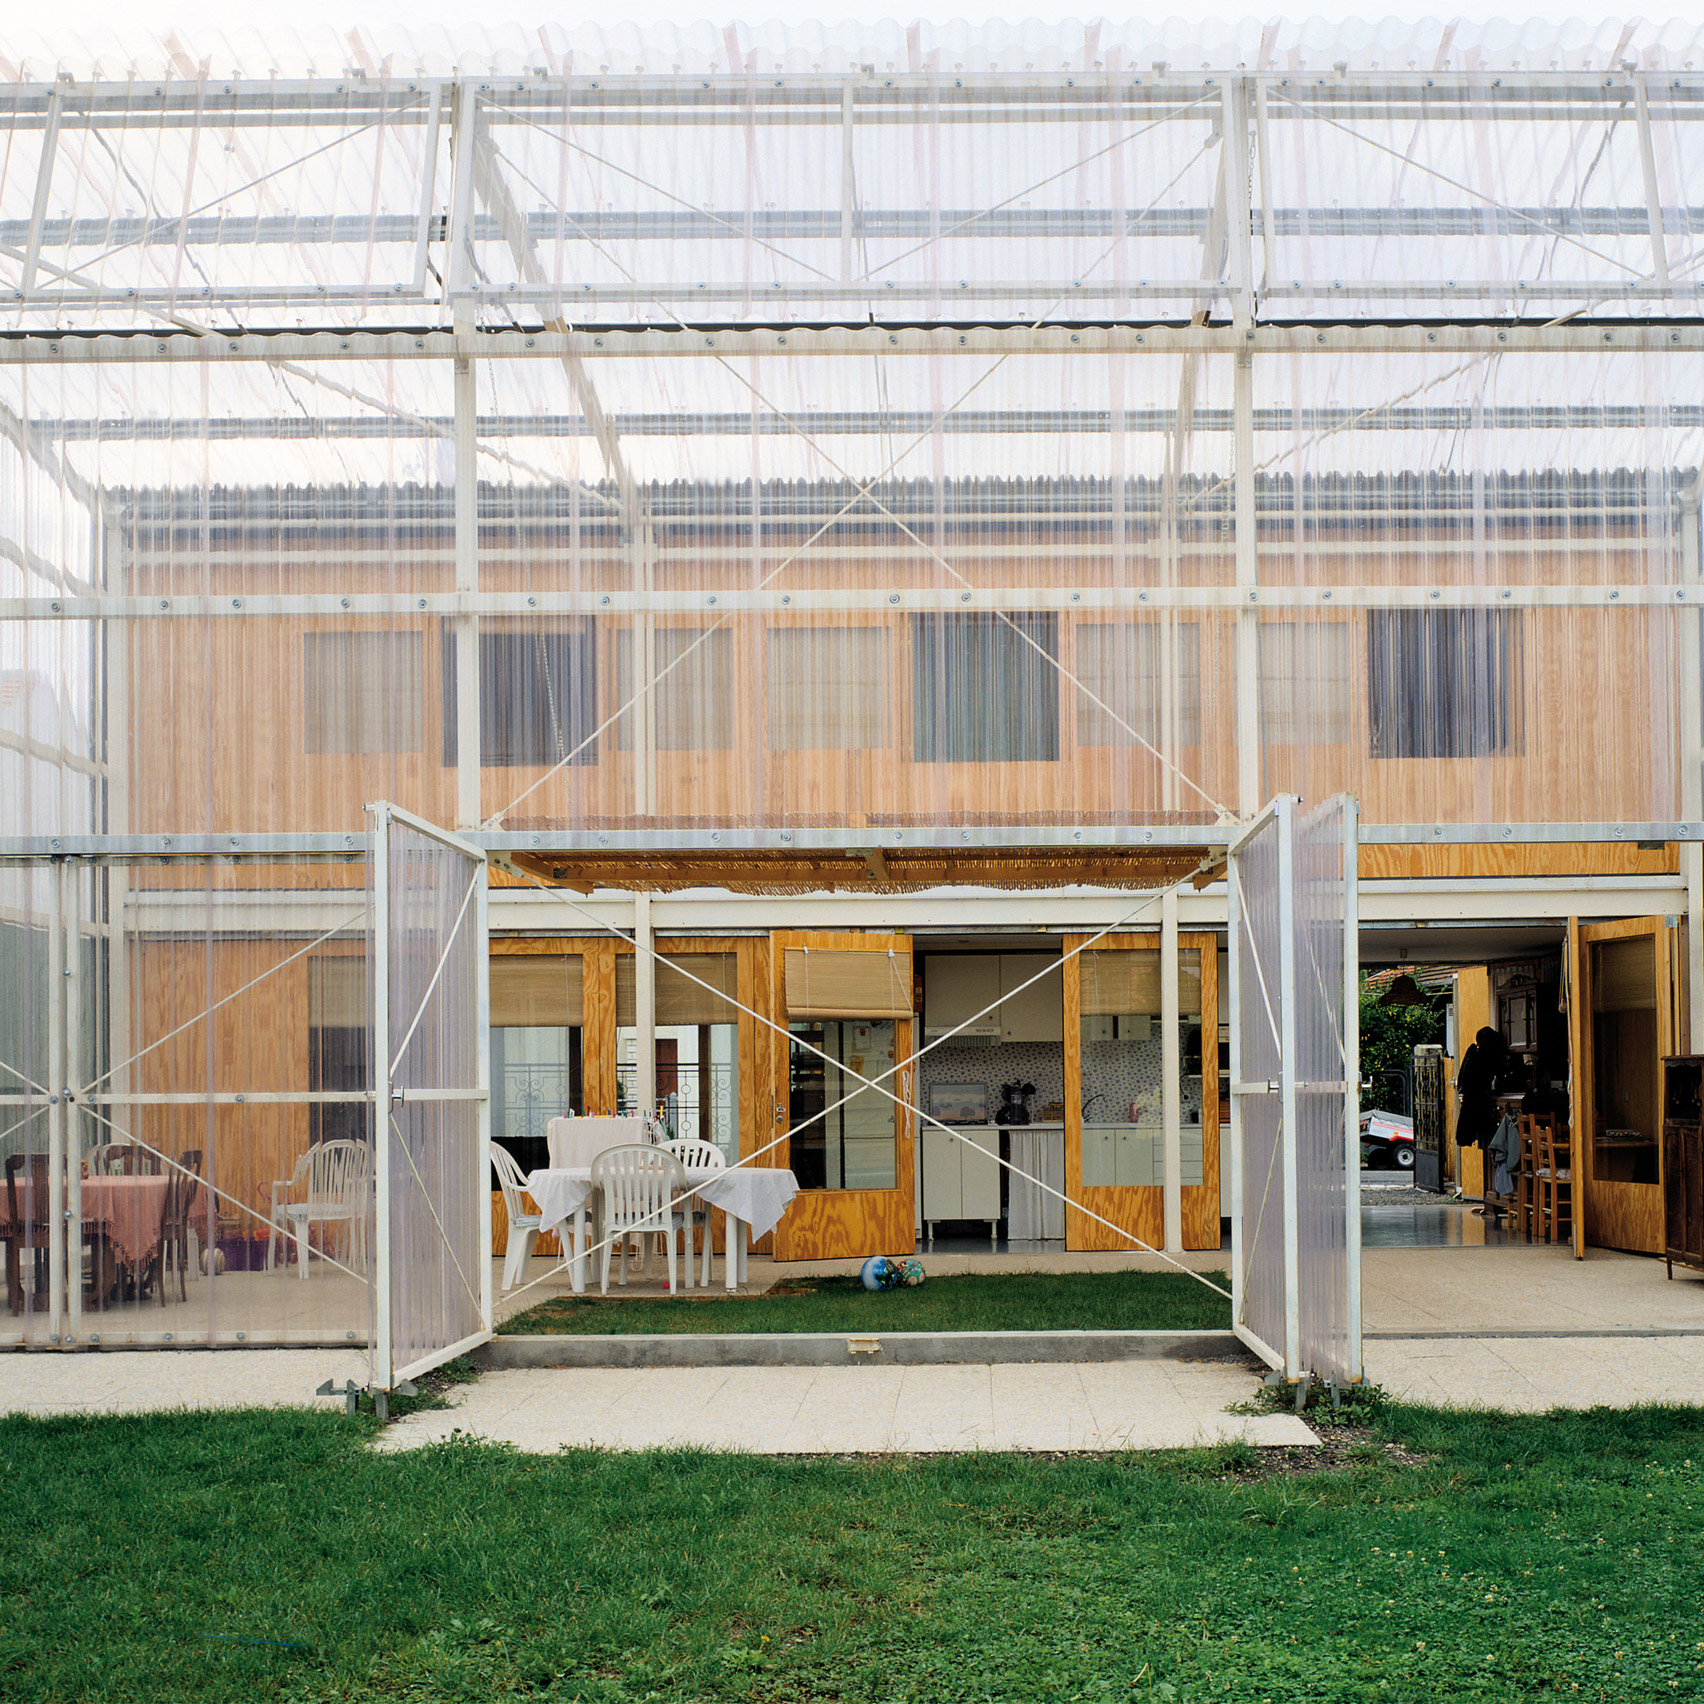 The polycarbonate conservatory of a private house in France